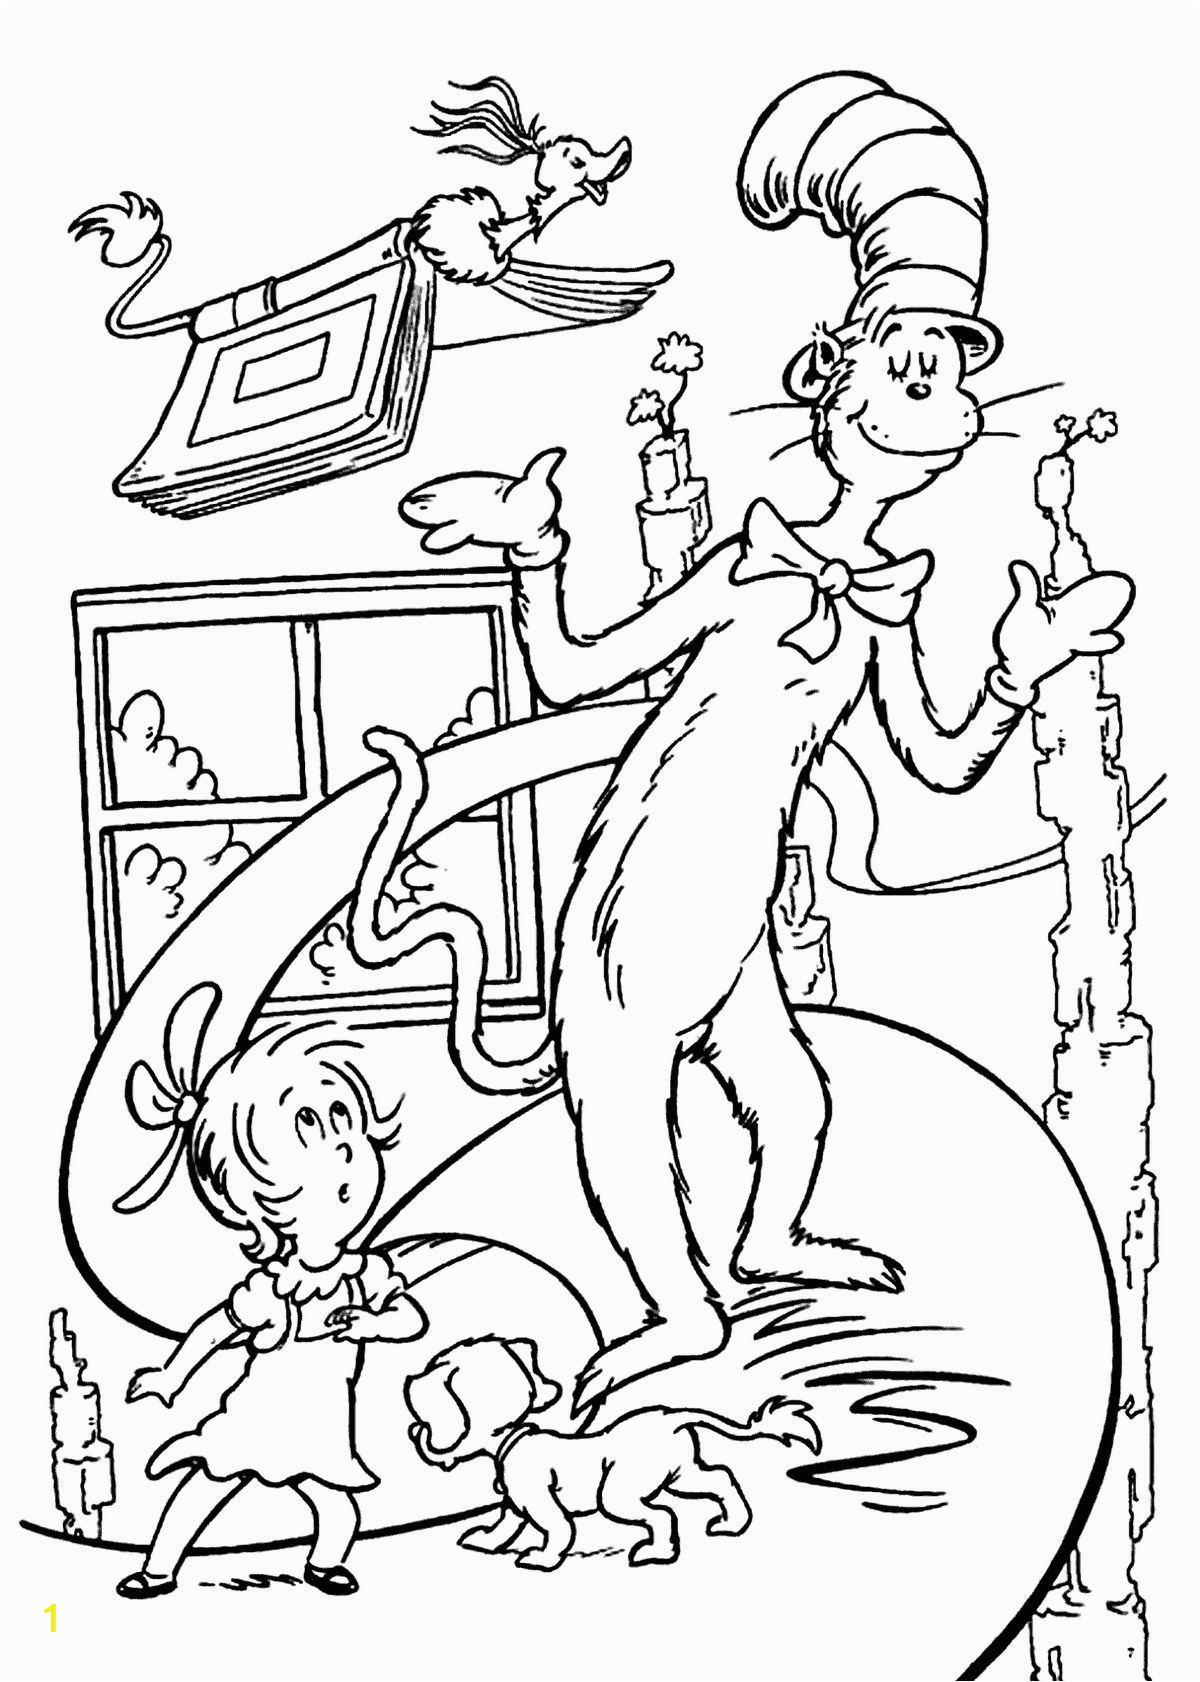 dr seuss birthday coloring pages